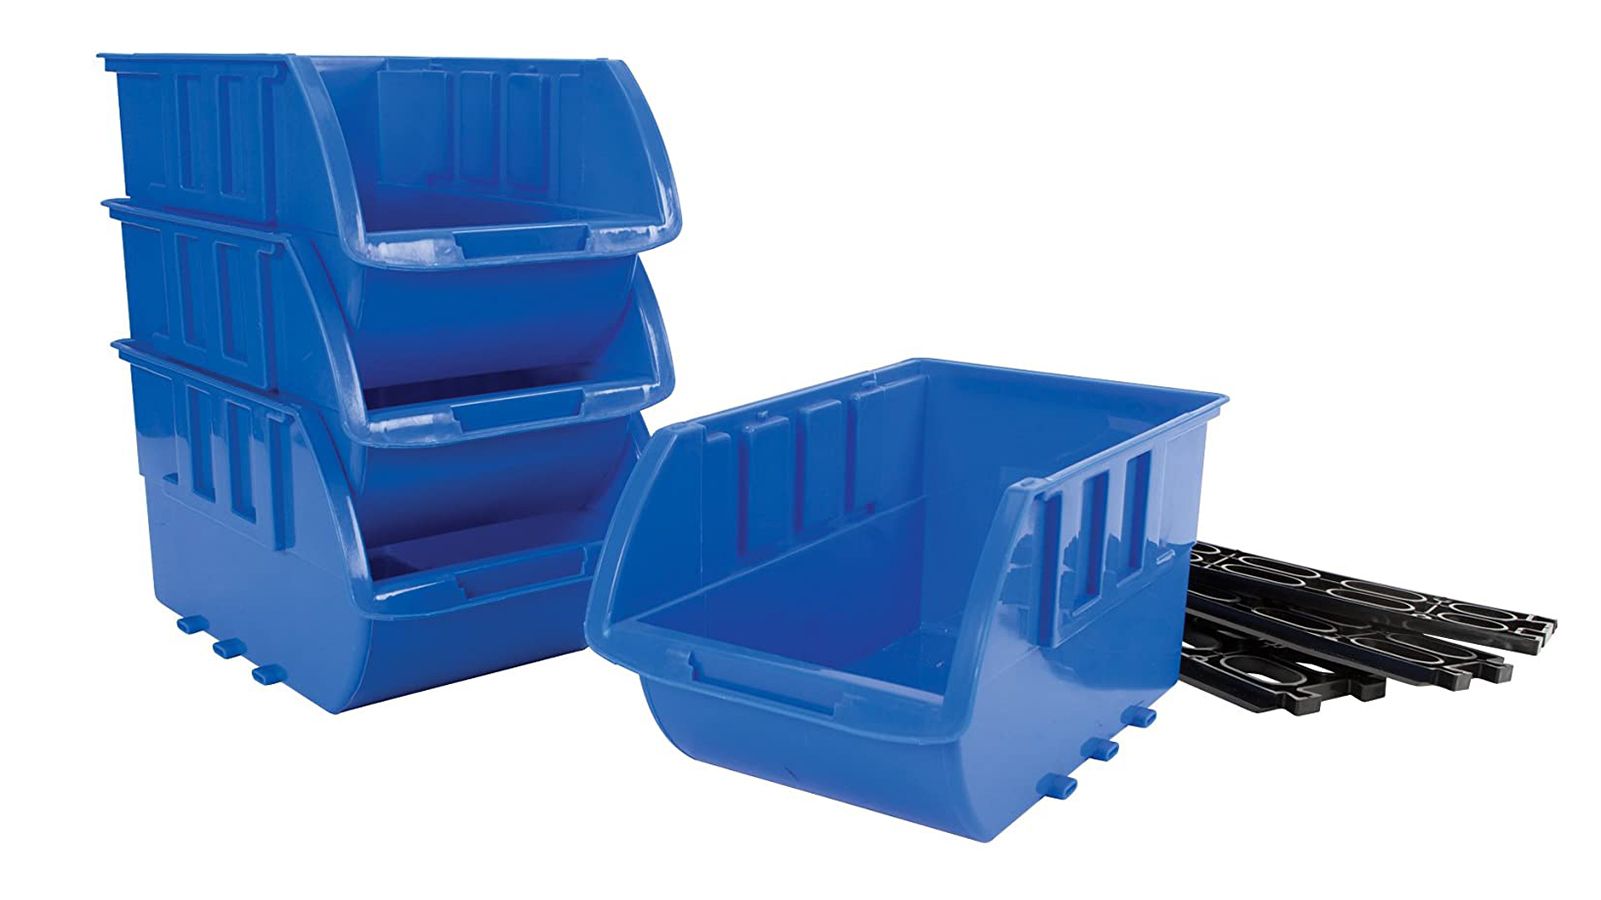 Mouse-Proof Garage Storage Containers - BLUE CRYSTAL SKY